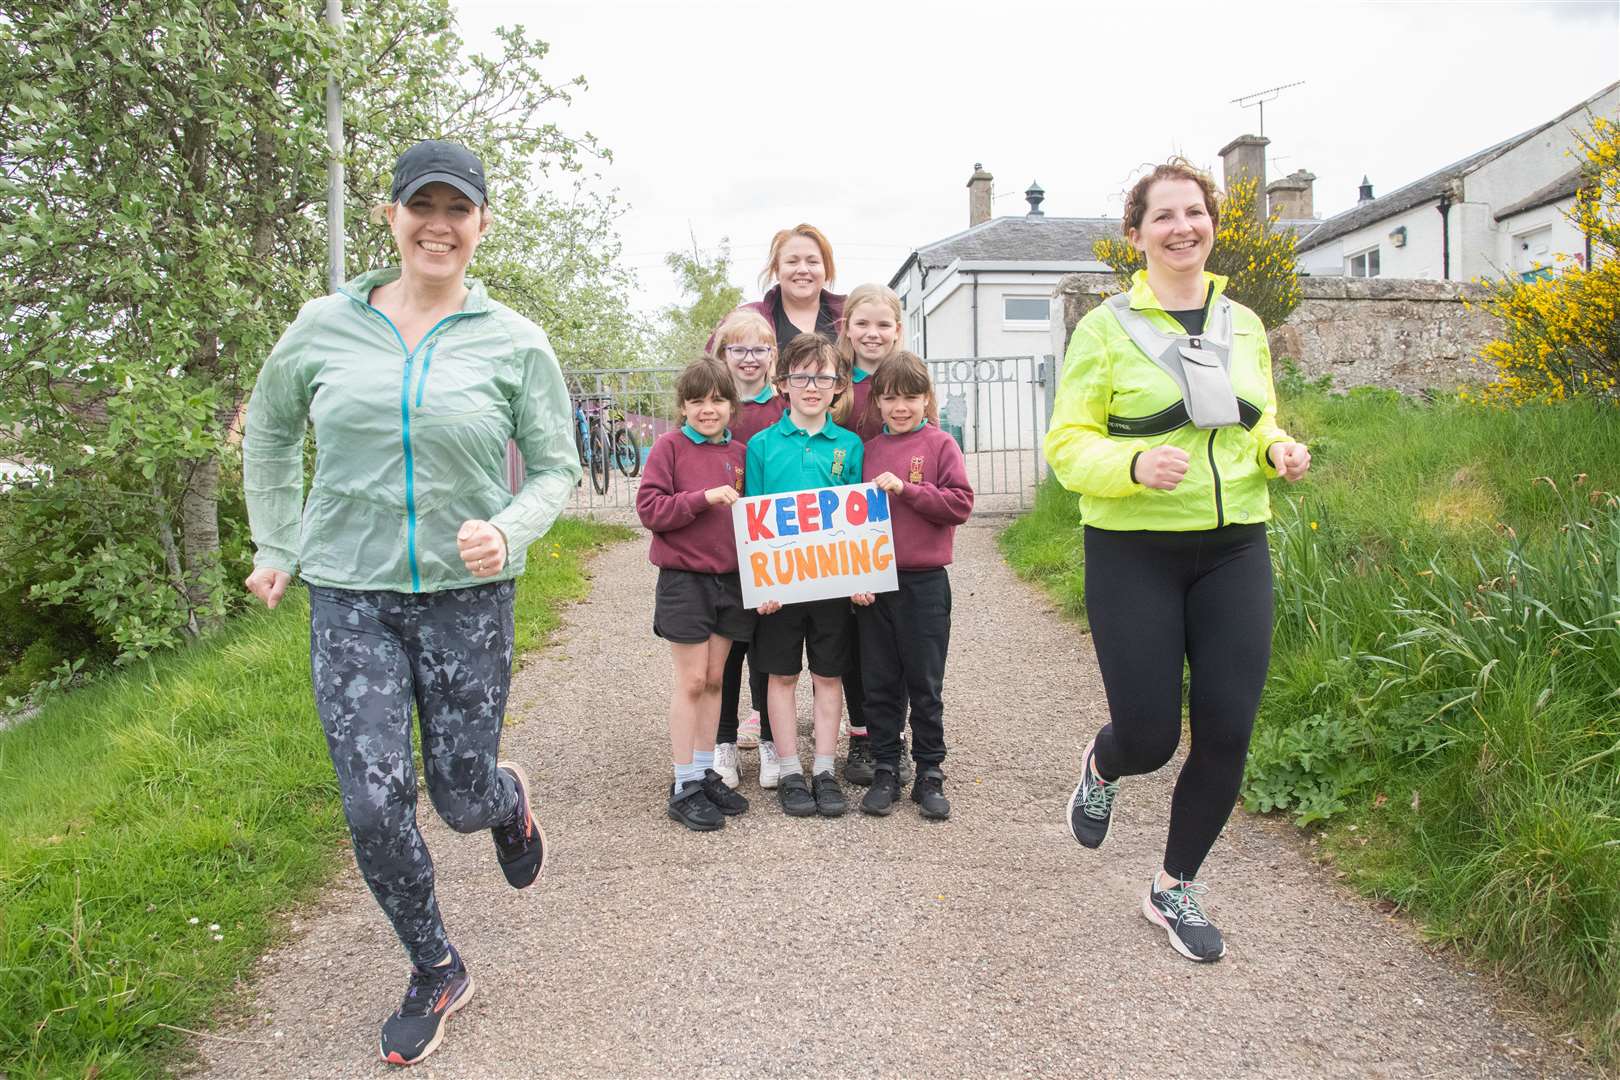 Ailsa Stinson (left) and Fiona Gibson (right) are joined by (clockwise from back) Headteacher Mairi Grant, Aimee Binnie, Amber McDonald, William Caldwell, Aila McDonald and Aila Gibson. Picture: Daniel Forsyth